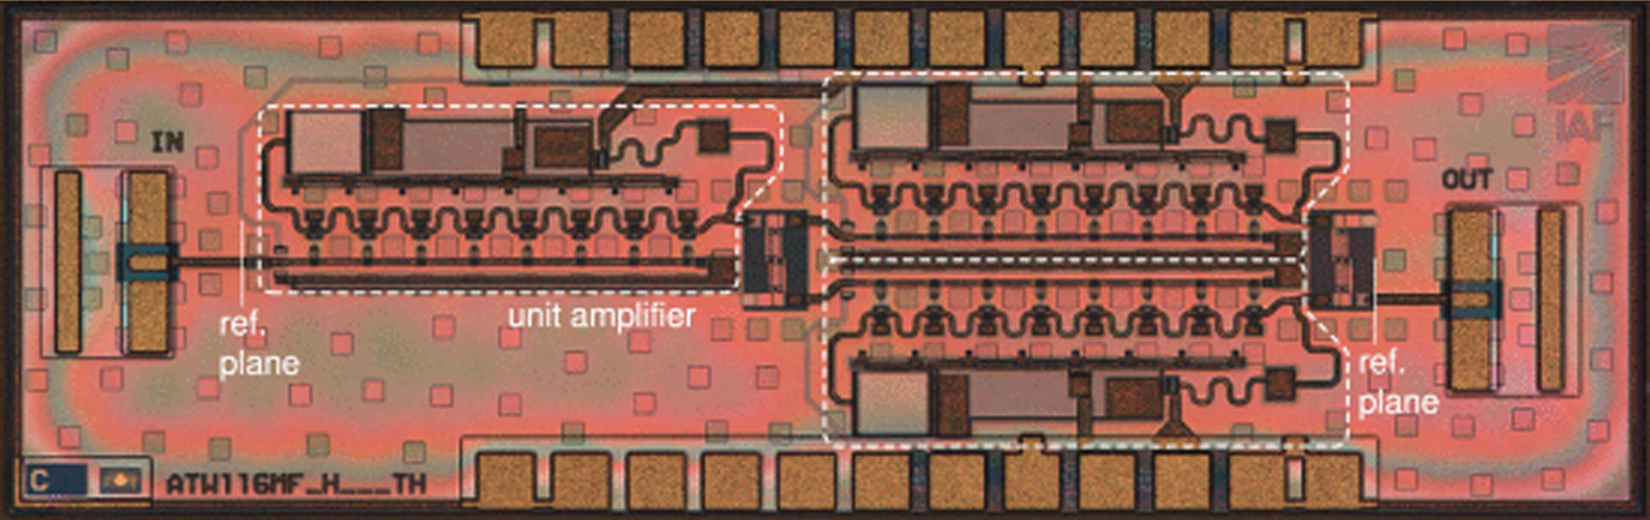 Photograph of the PA-MMIC developed by Fraunhofer IAF